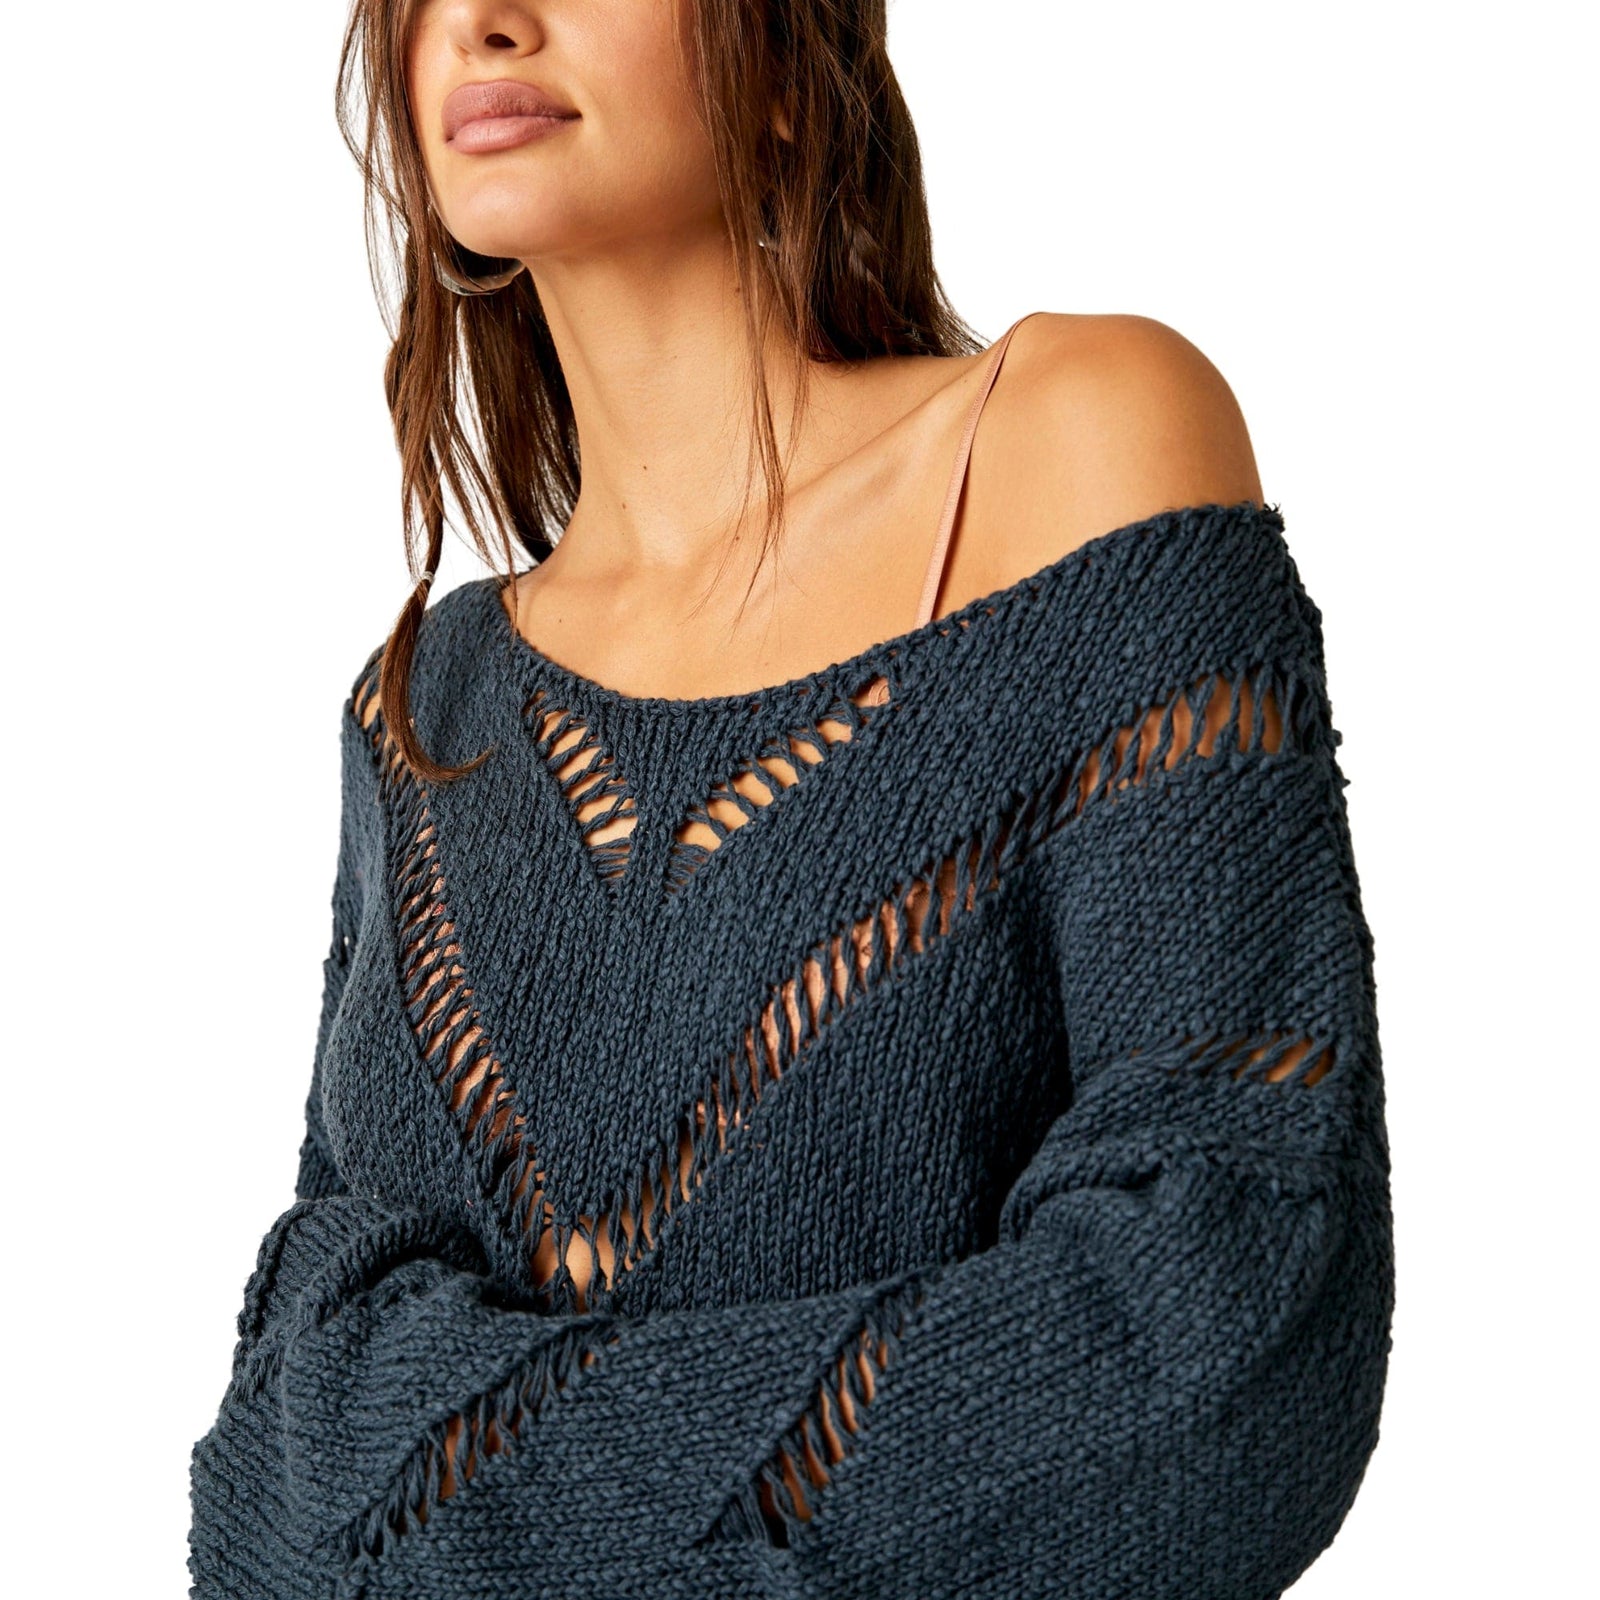 Free People Hayley Sweater in Navy